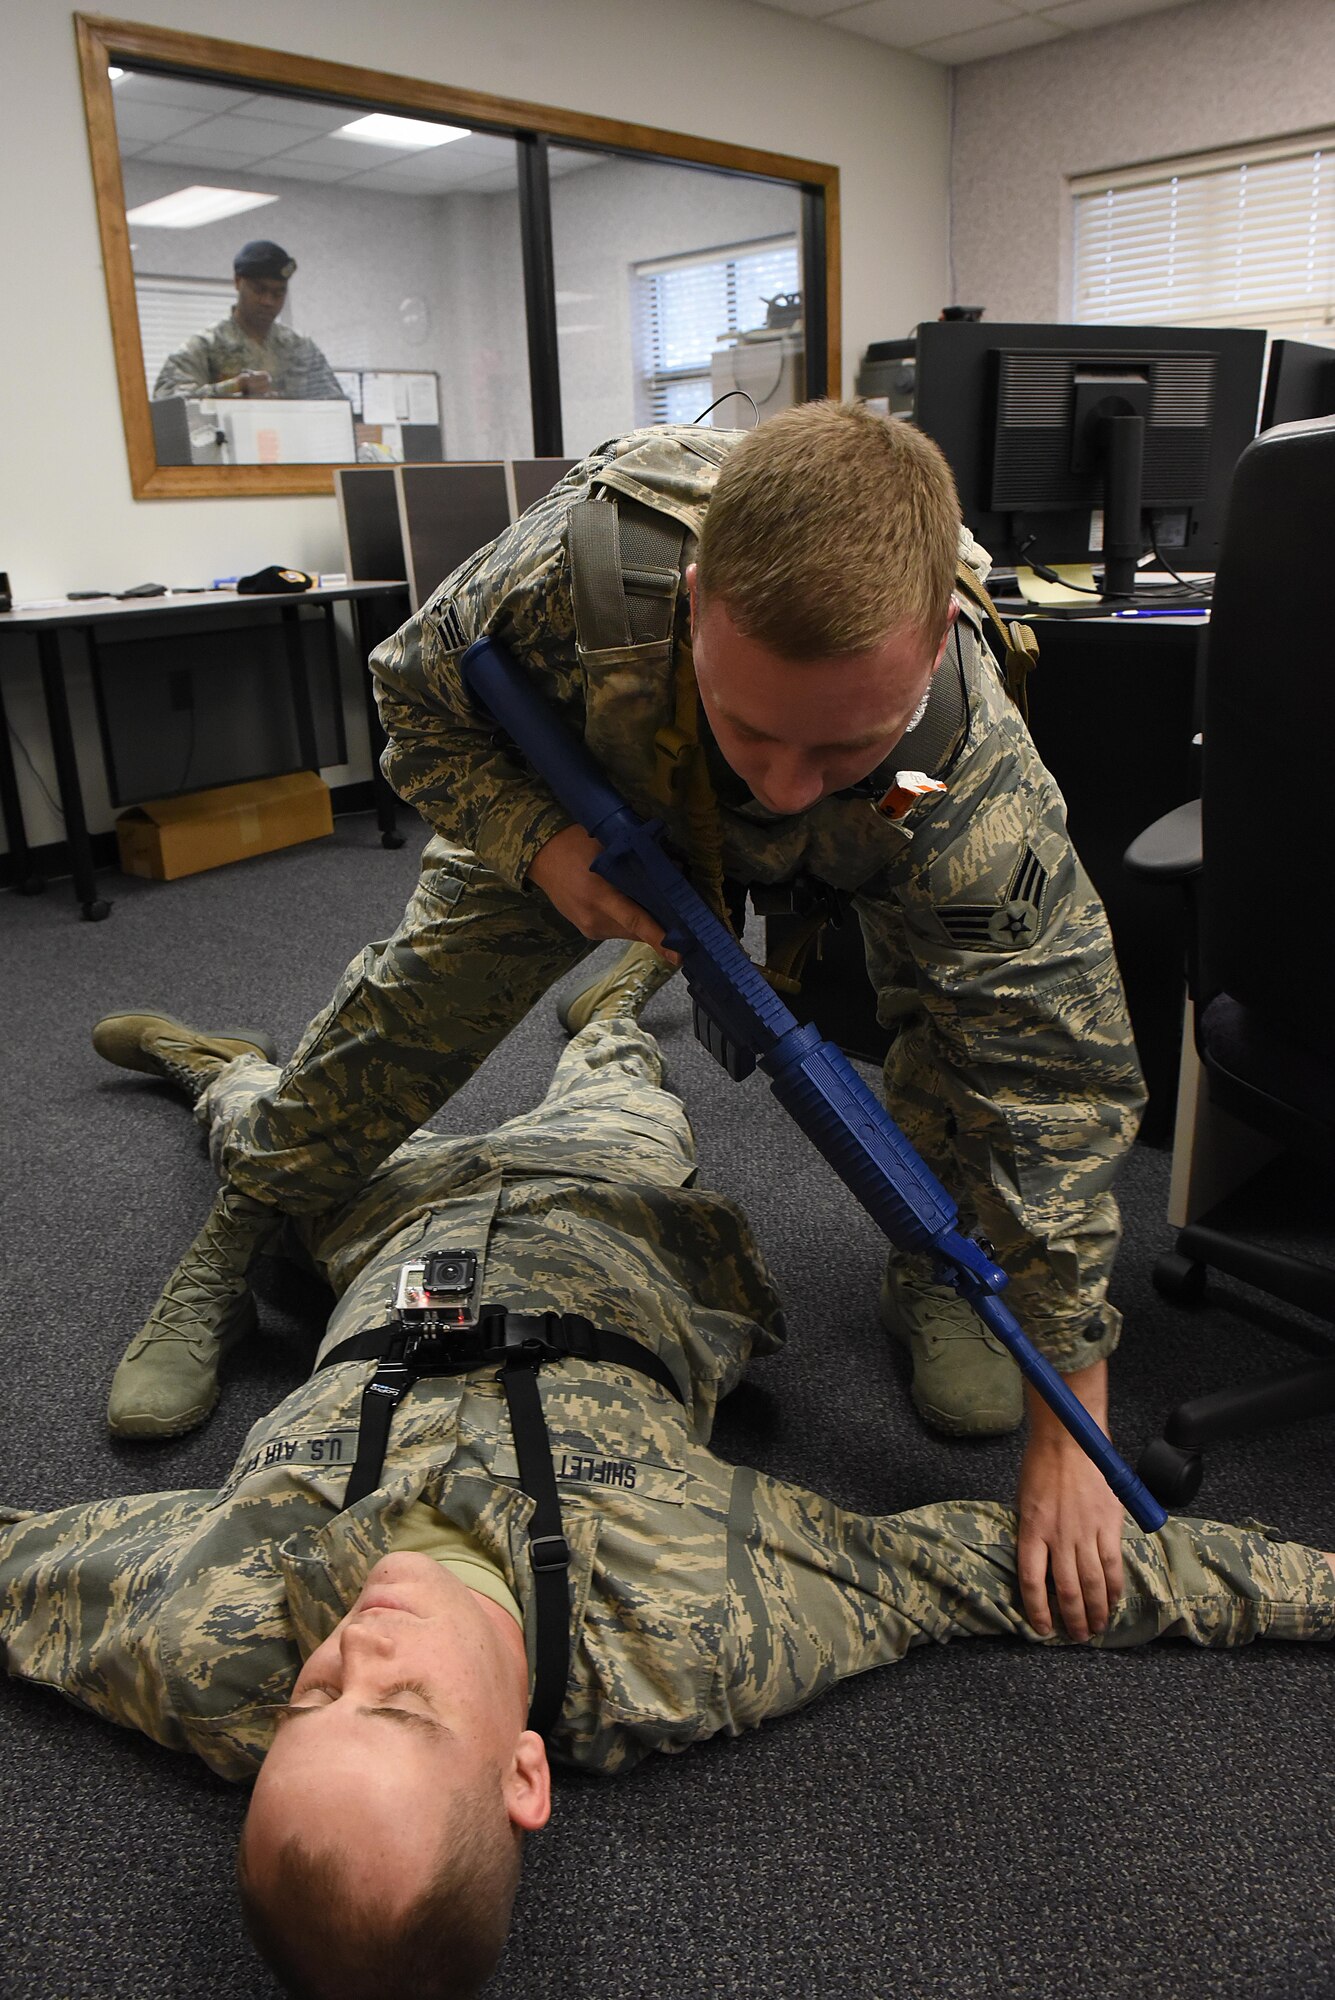 Senior Airman James Bugaj, 4th Security Forces Squadron patrolman, apprehends an “active shooter” during a planned exercise, Jan. 11, 2017, at Seymour Johnson Air Force Base, North Carolina. The 4th Fighter Wing designs realistic exercises to keep Airmen in a warrior mindset and sharpen tactics, techniques and procedures to prevent unnecessary loss of life and injuries in the event of a real-world incident. (U.S. Air Force photo by Airman 1st Class Kenneth Boyton)